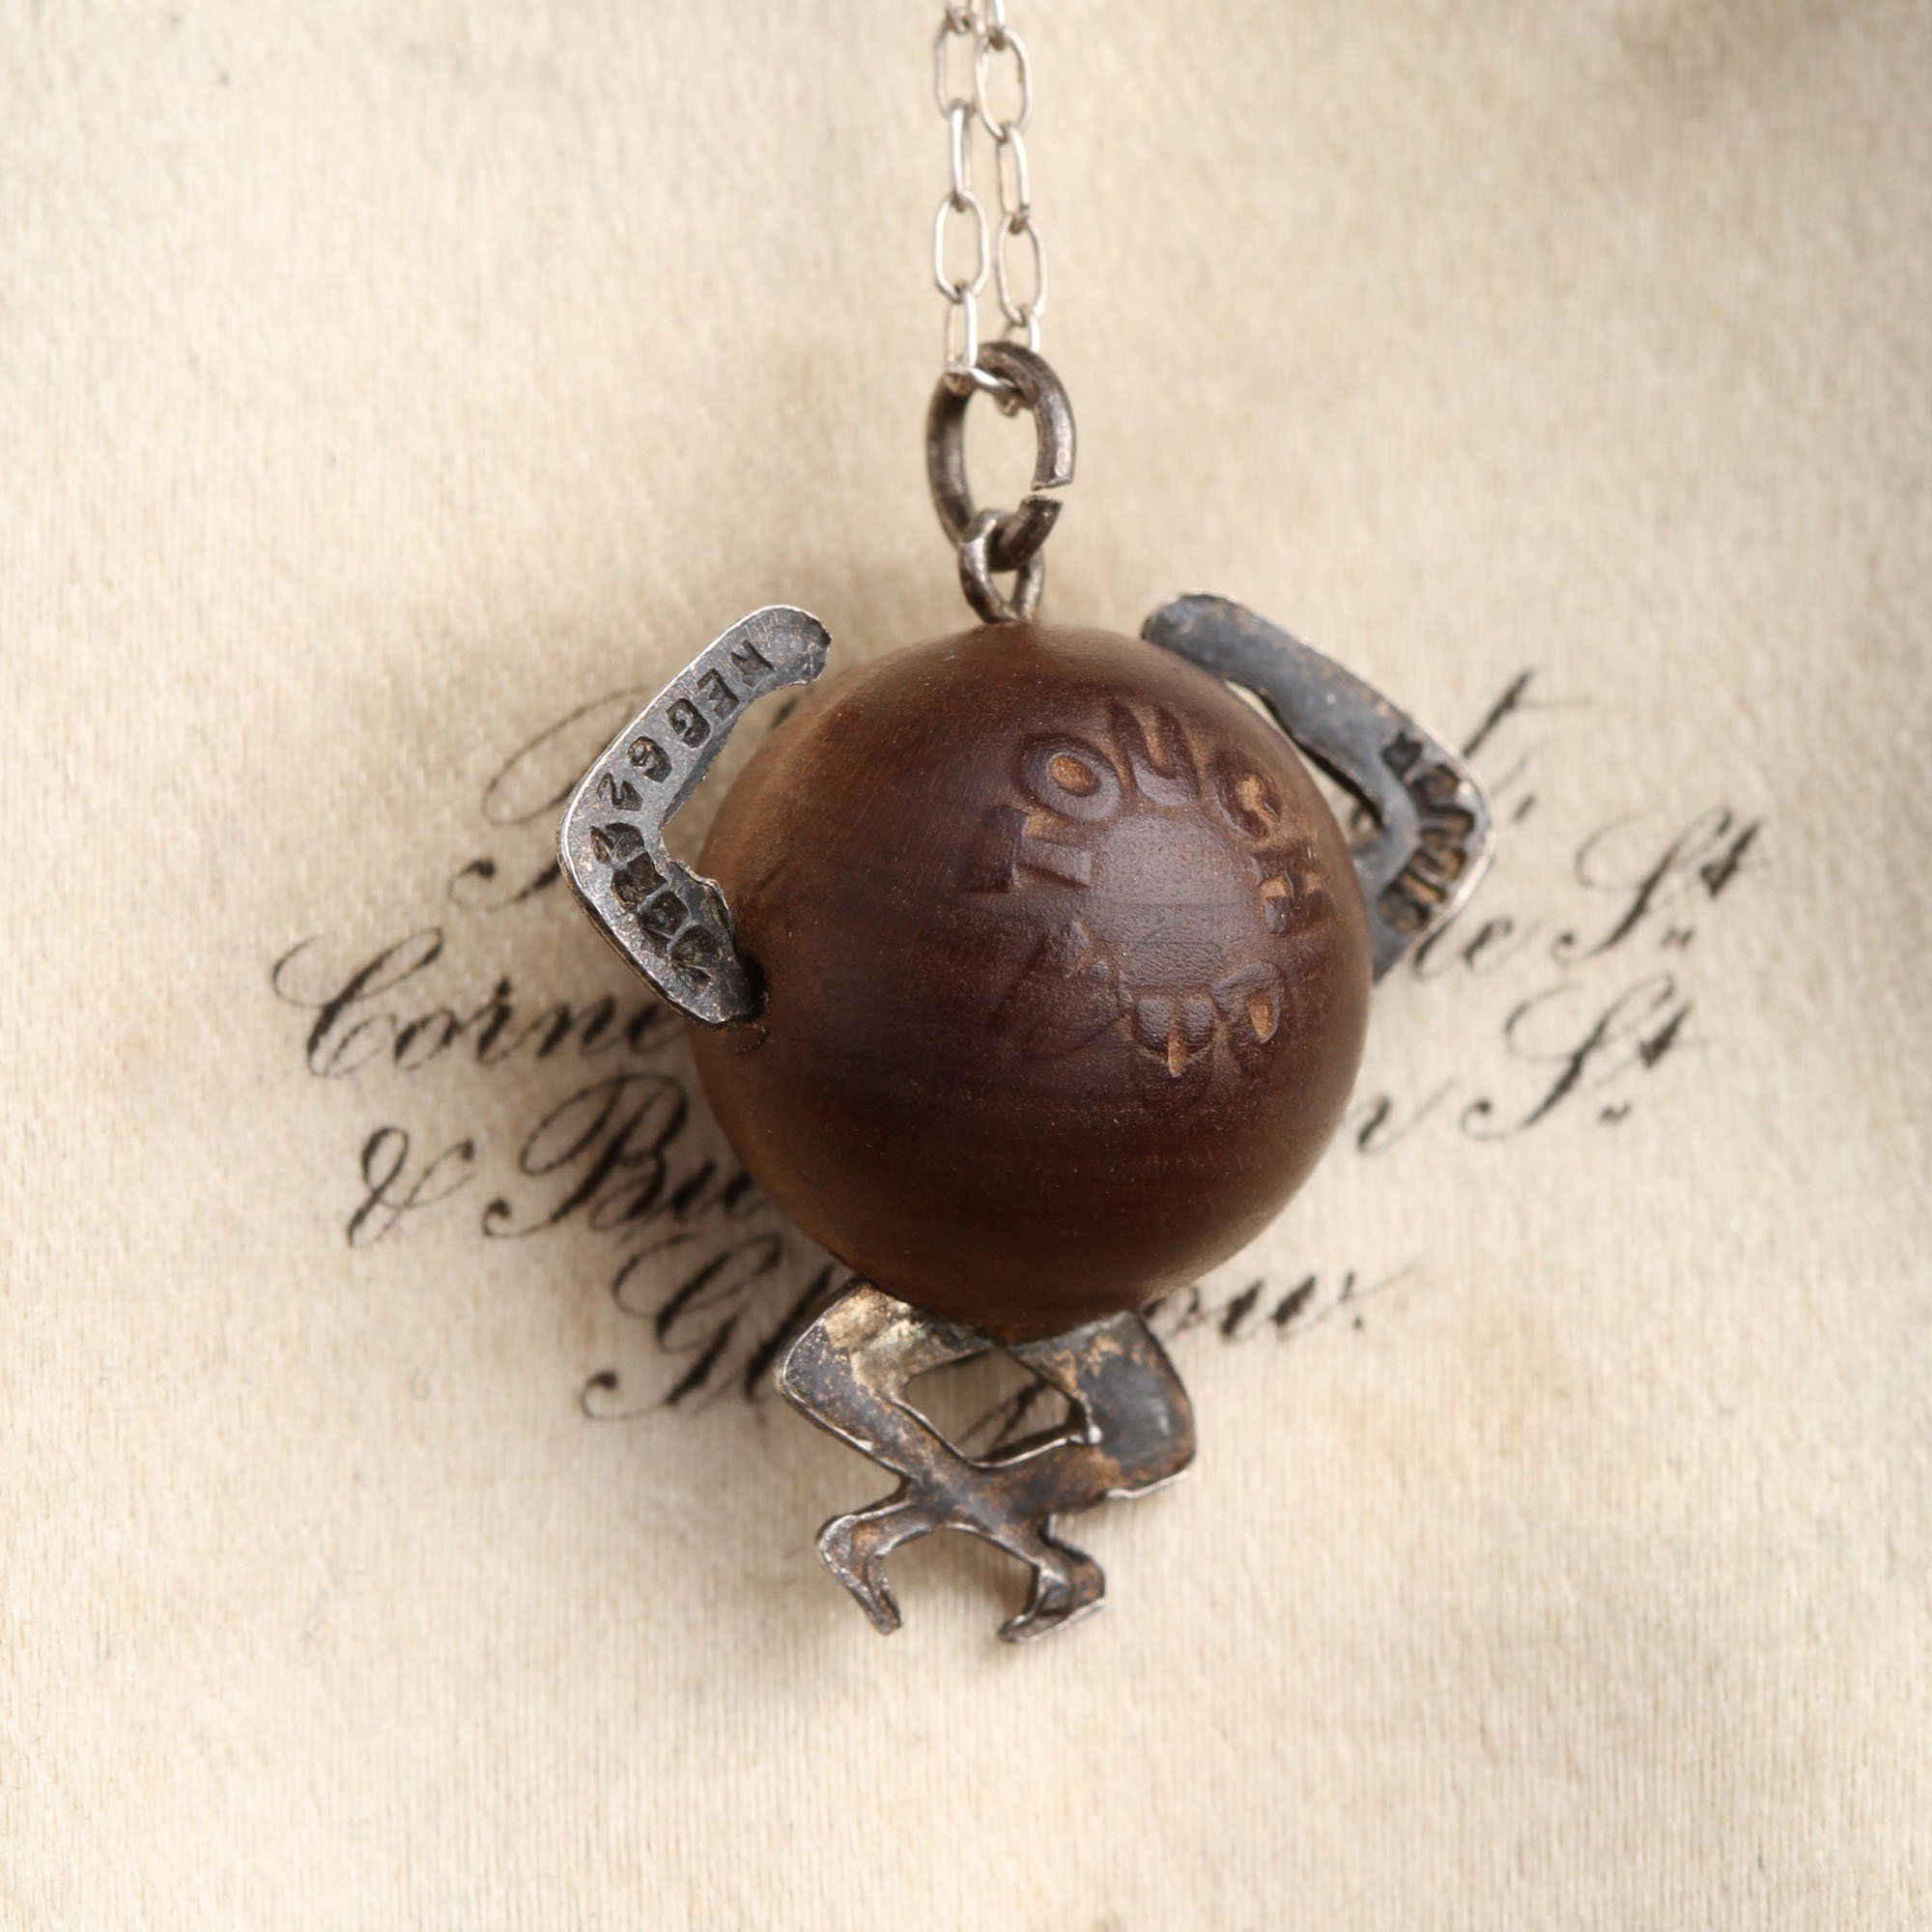 A well-worn "Touch wud" charm from the WW1 era. From the Erica Weiner Jewelry archives. 